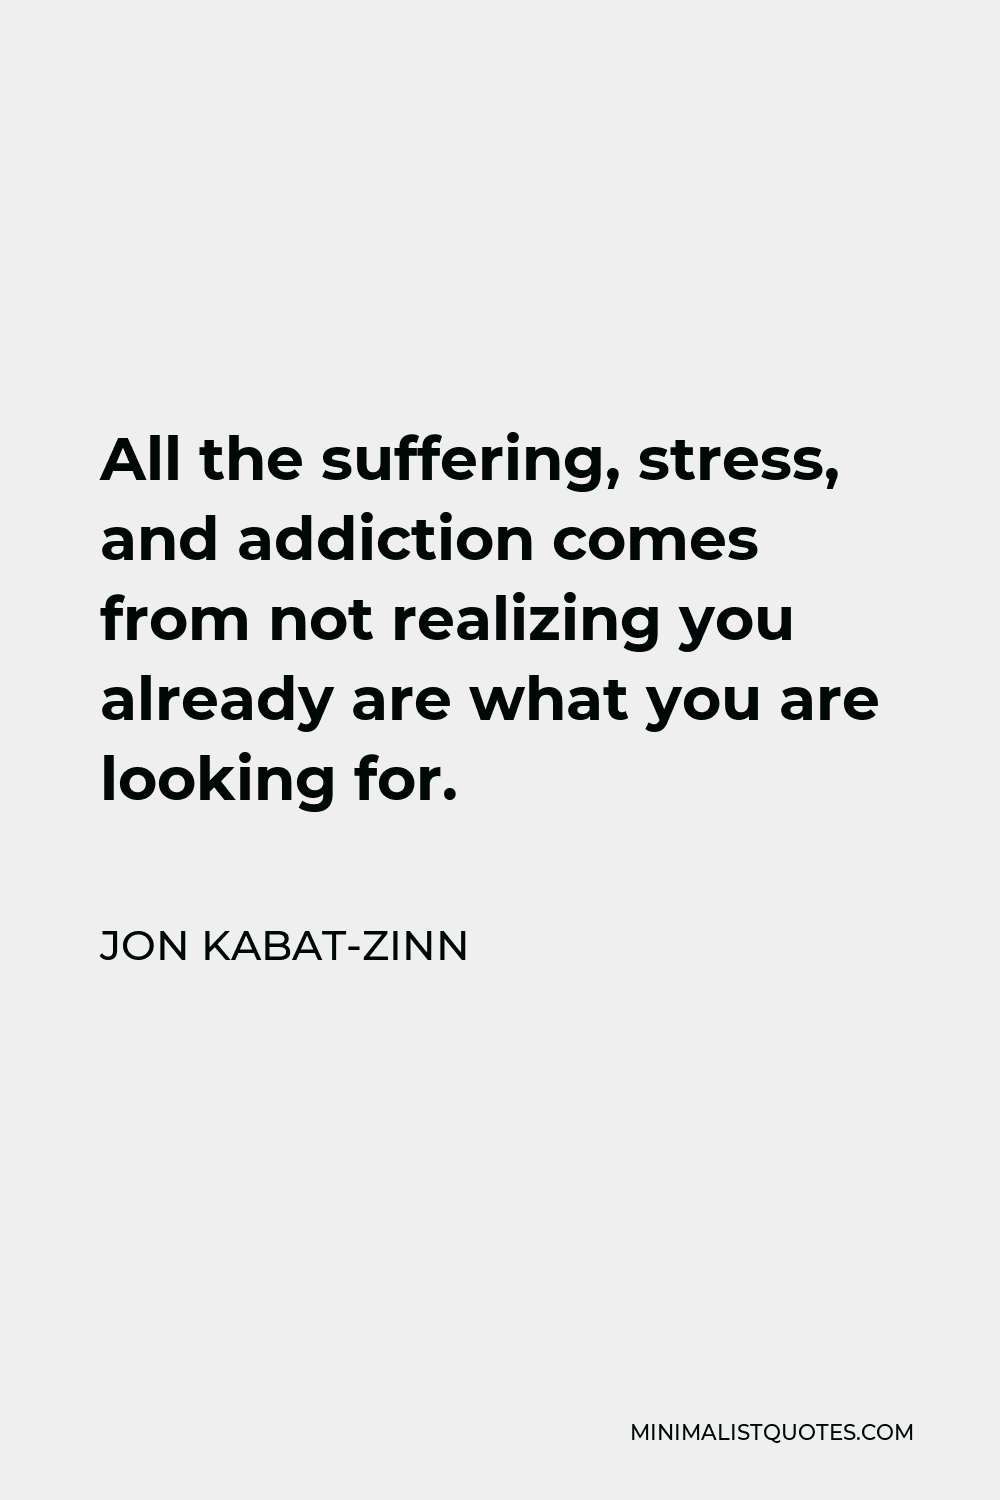 Jon Kabat-Zinn Quote - All the suffering, stress, and addiction comes from not realizing you already are what you are looking for.